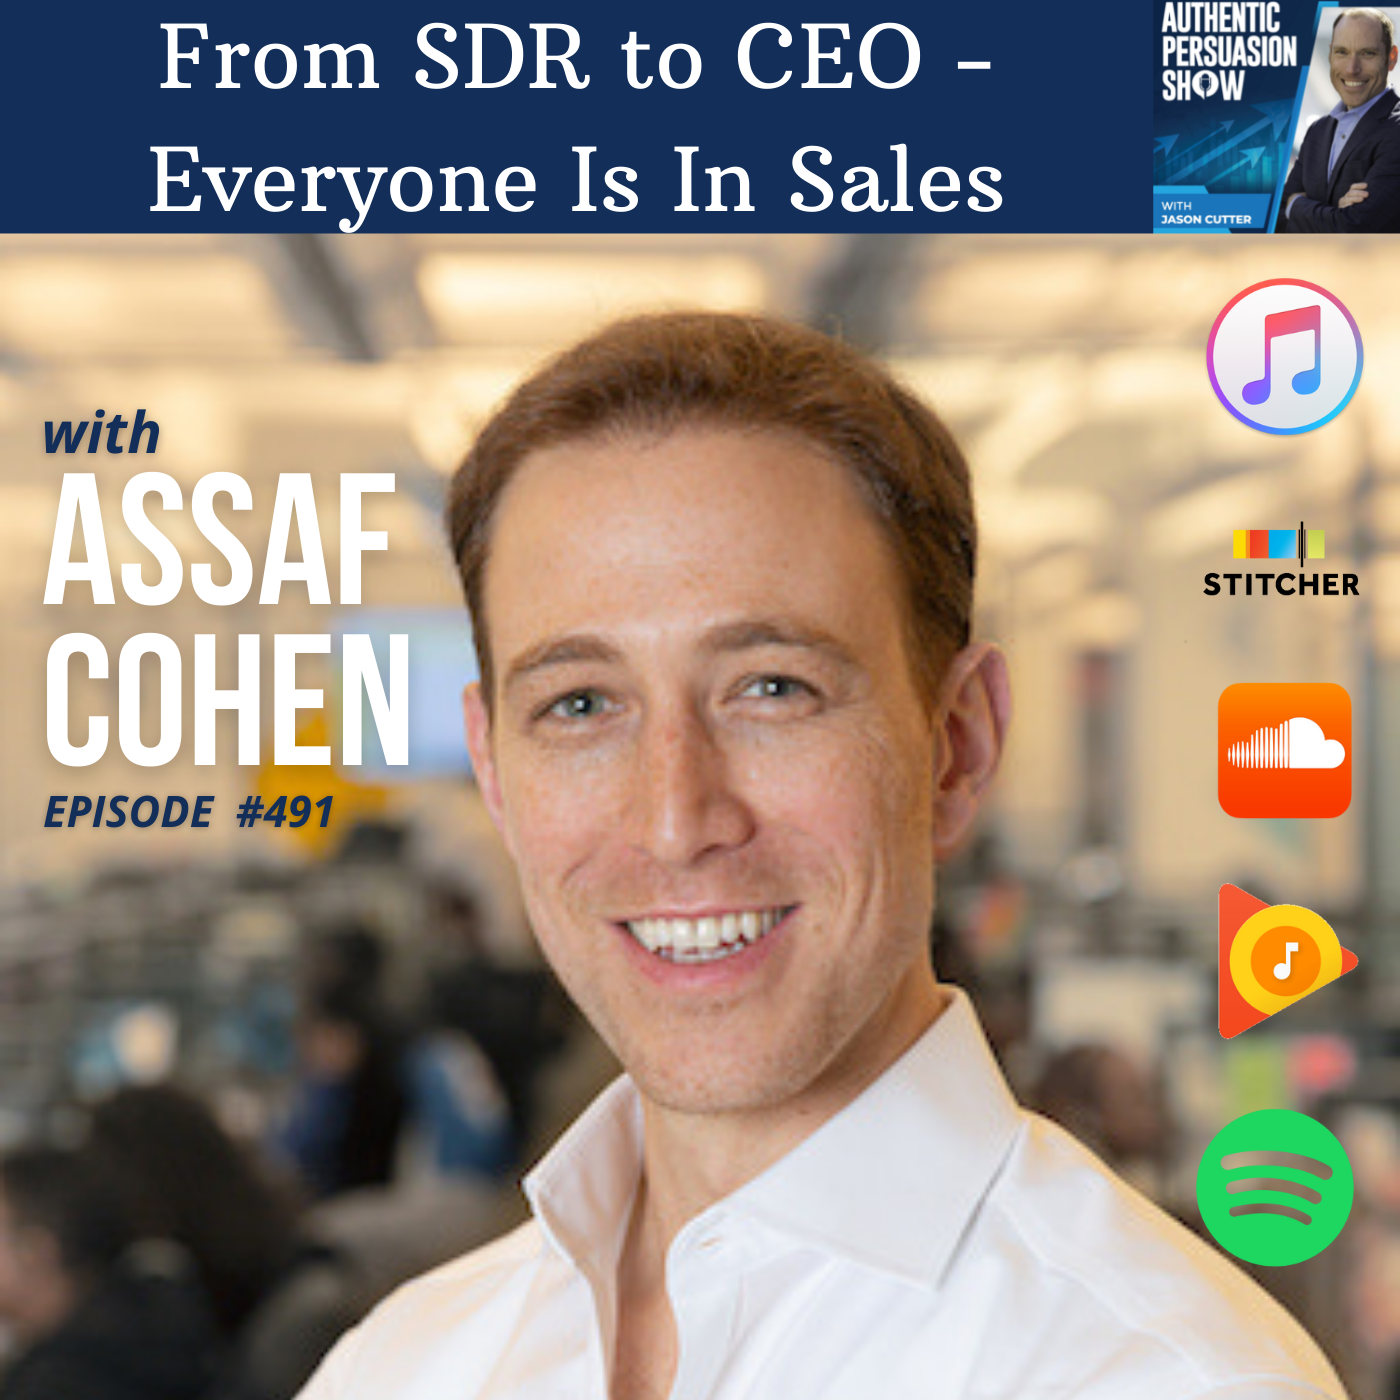 [491] From SDR to CEO - Everyone Is In Sales, with Assaf Cohen from Pay.com